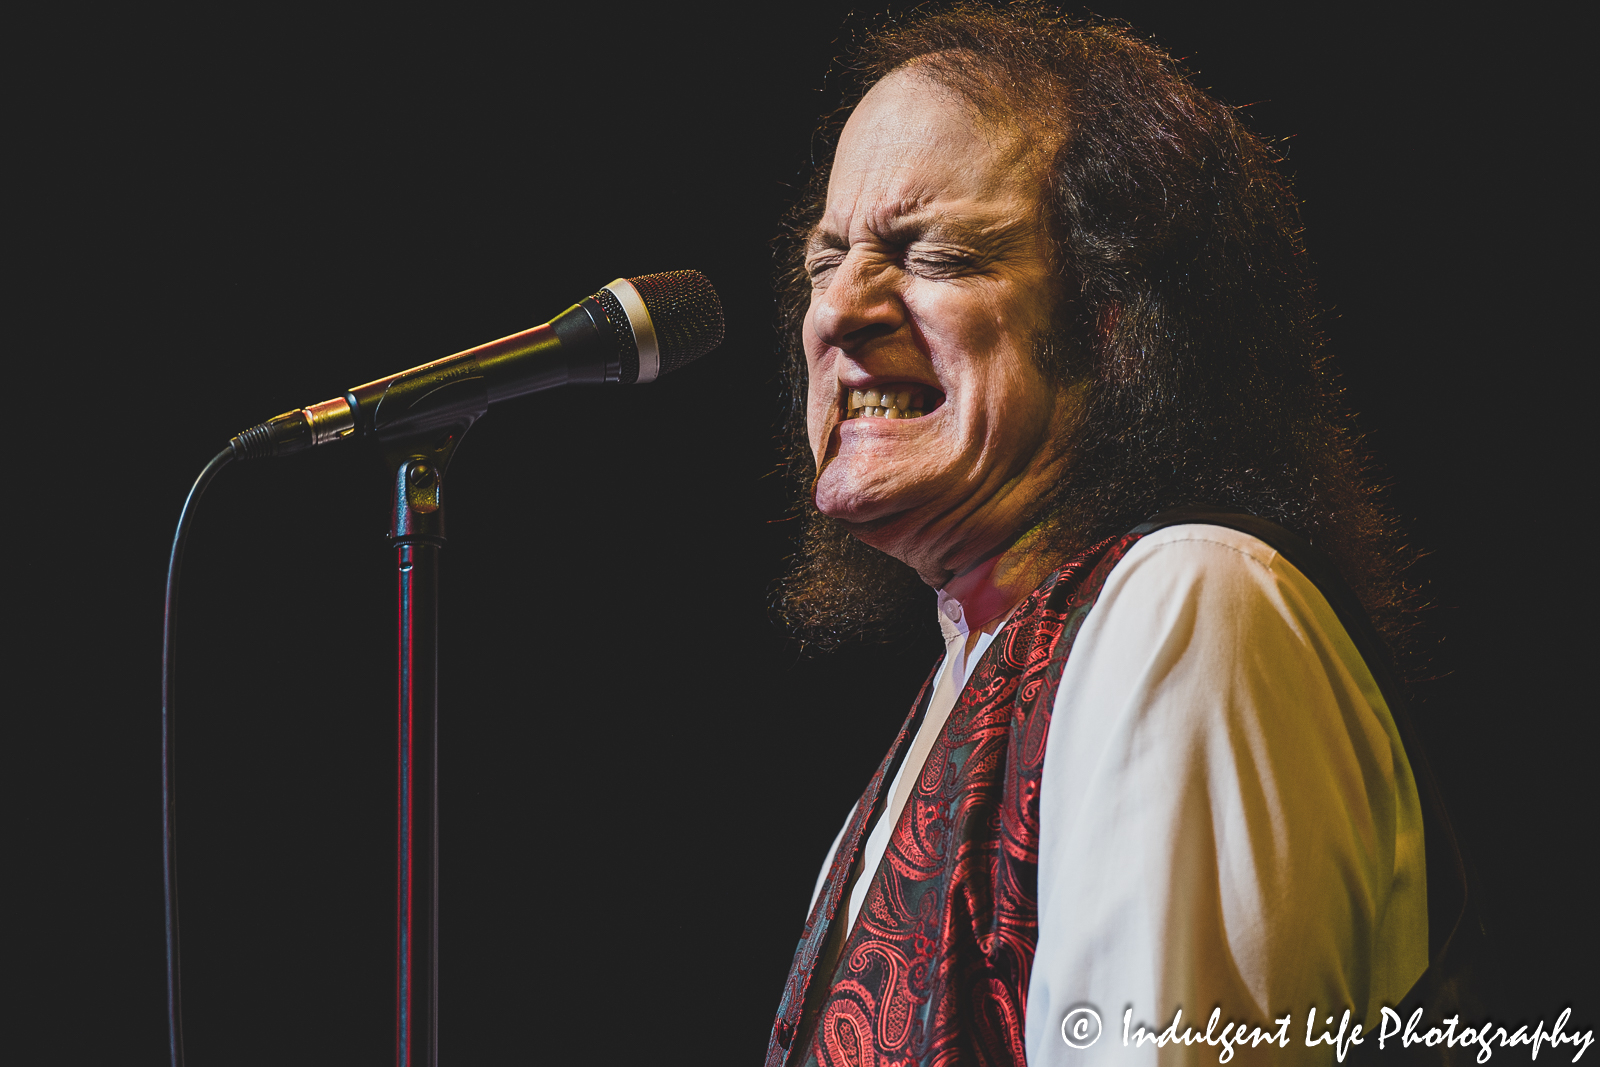 Tommy James singing "Say I Am" live in concert at Muriel Kauffman Theatre inside of Kauffman Center for the Performing Arts in Kansas City, MO on April 1, 2023.